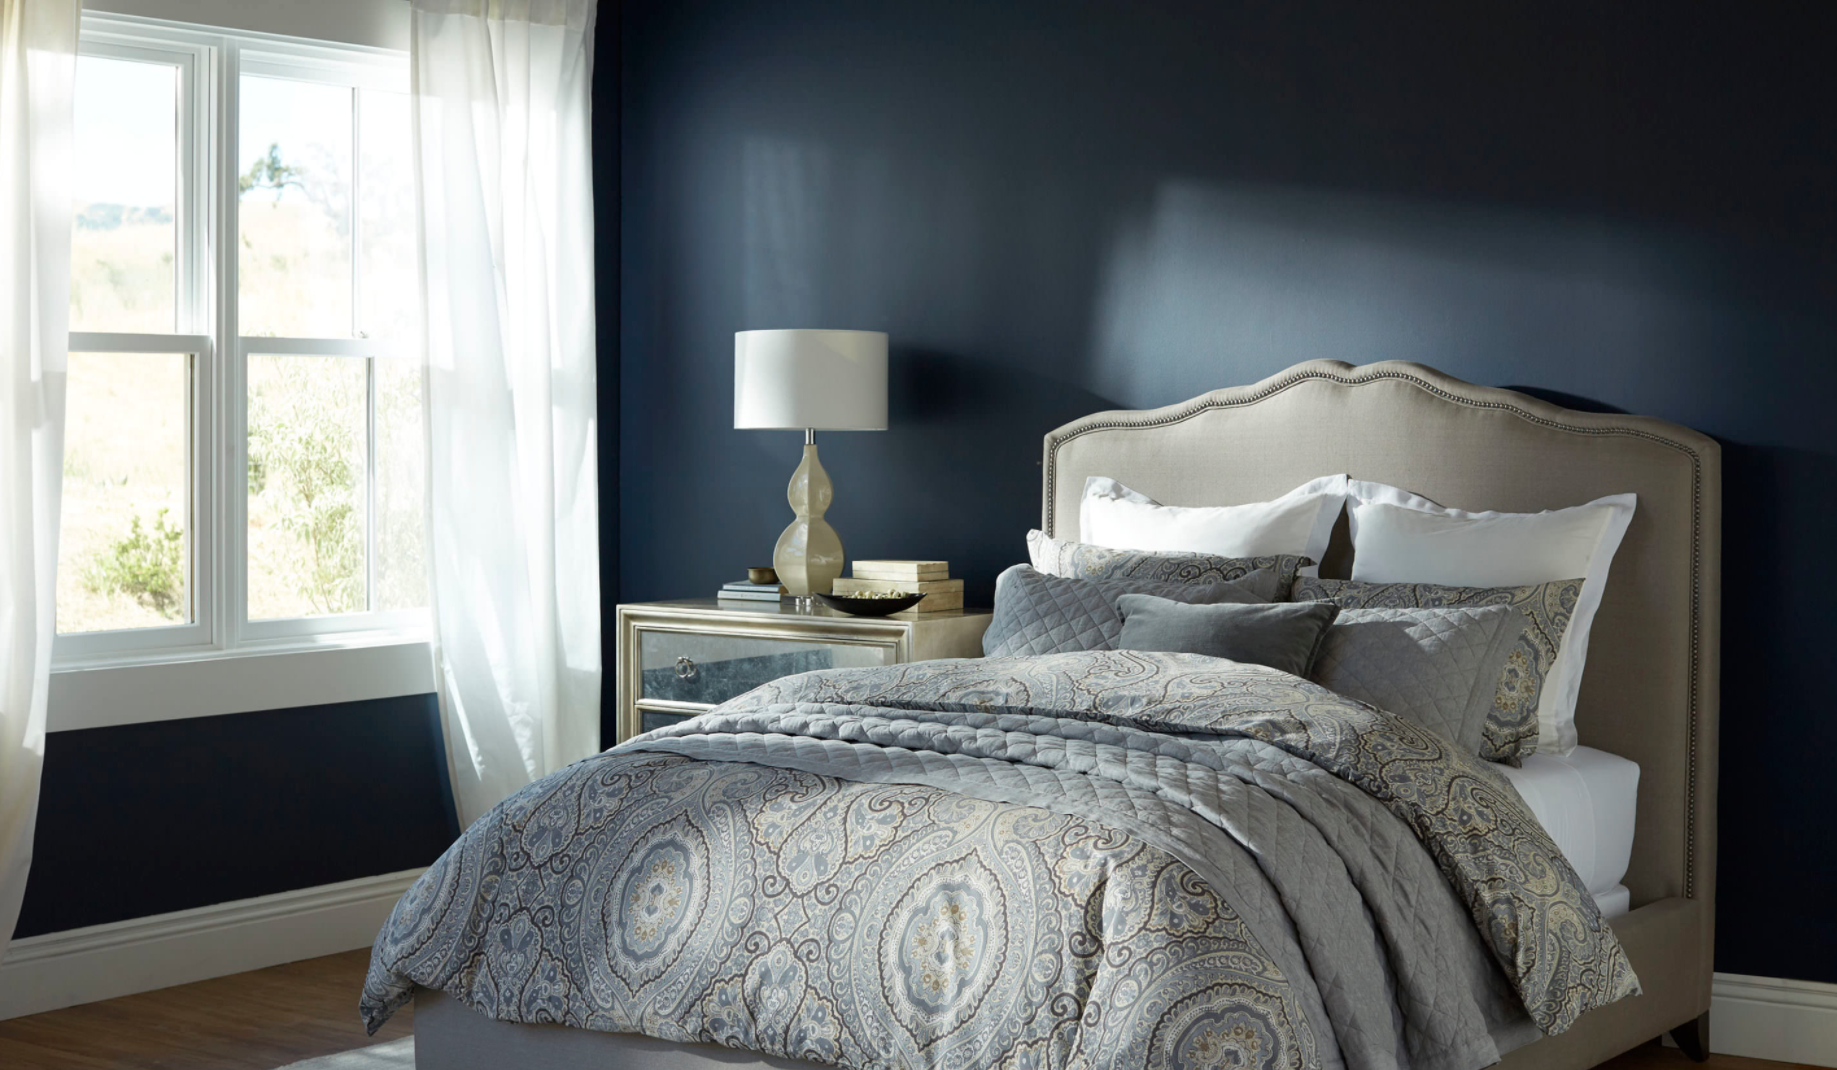 Picking a light blue paint color for our guest bedroom — The Grit and Polish